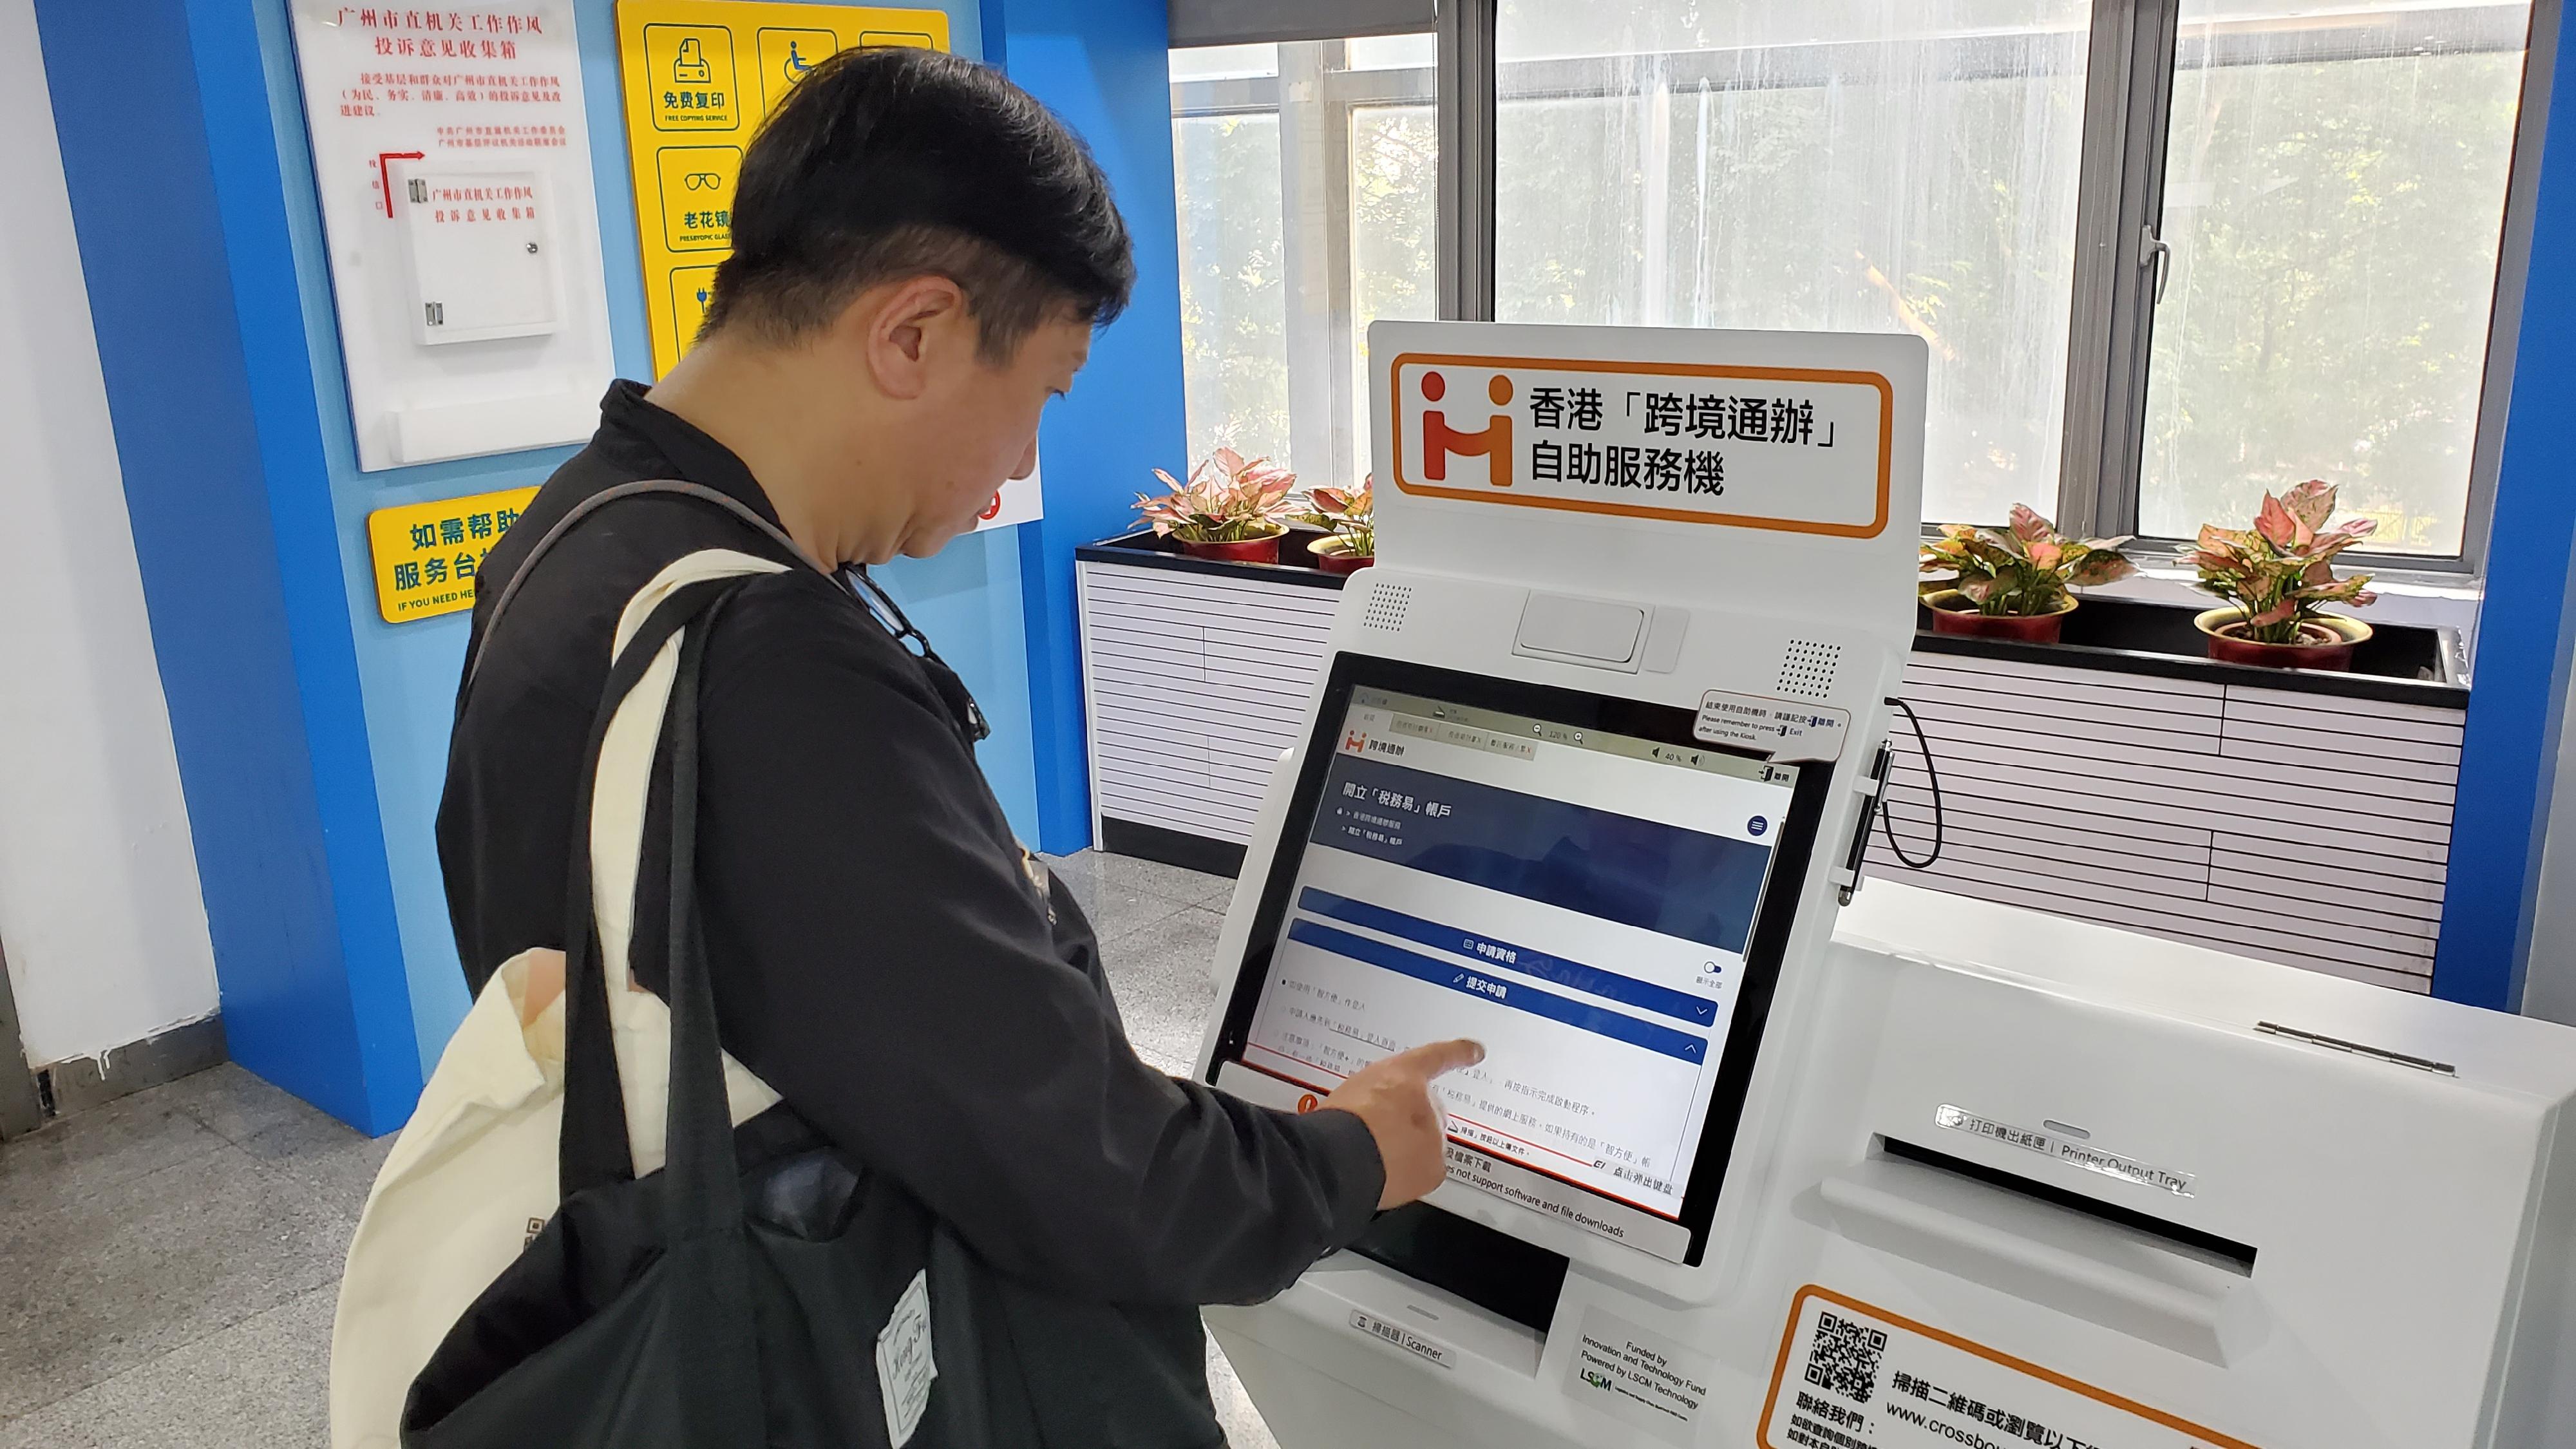 The Hong Kong Special Administrative Region Government has set up a Hong Kong Cross-boundary Public Services self-service kiosk on the third floor of the Guangzhou Municipal Government Service Center, Zhujiang New Town, Guangzhou, to enable enterprises and residents in the Greater Bay Area to access Hong Kong Government services conveniently. 